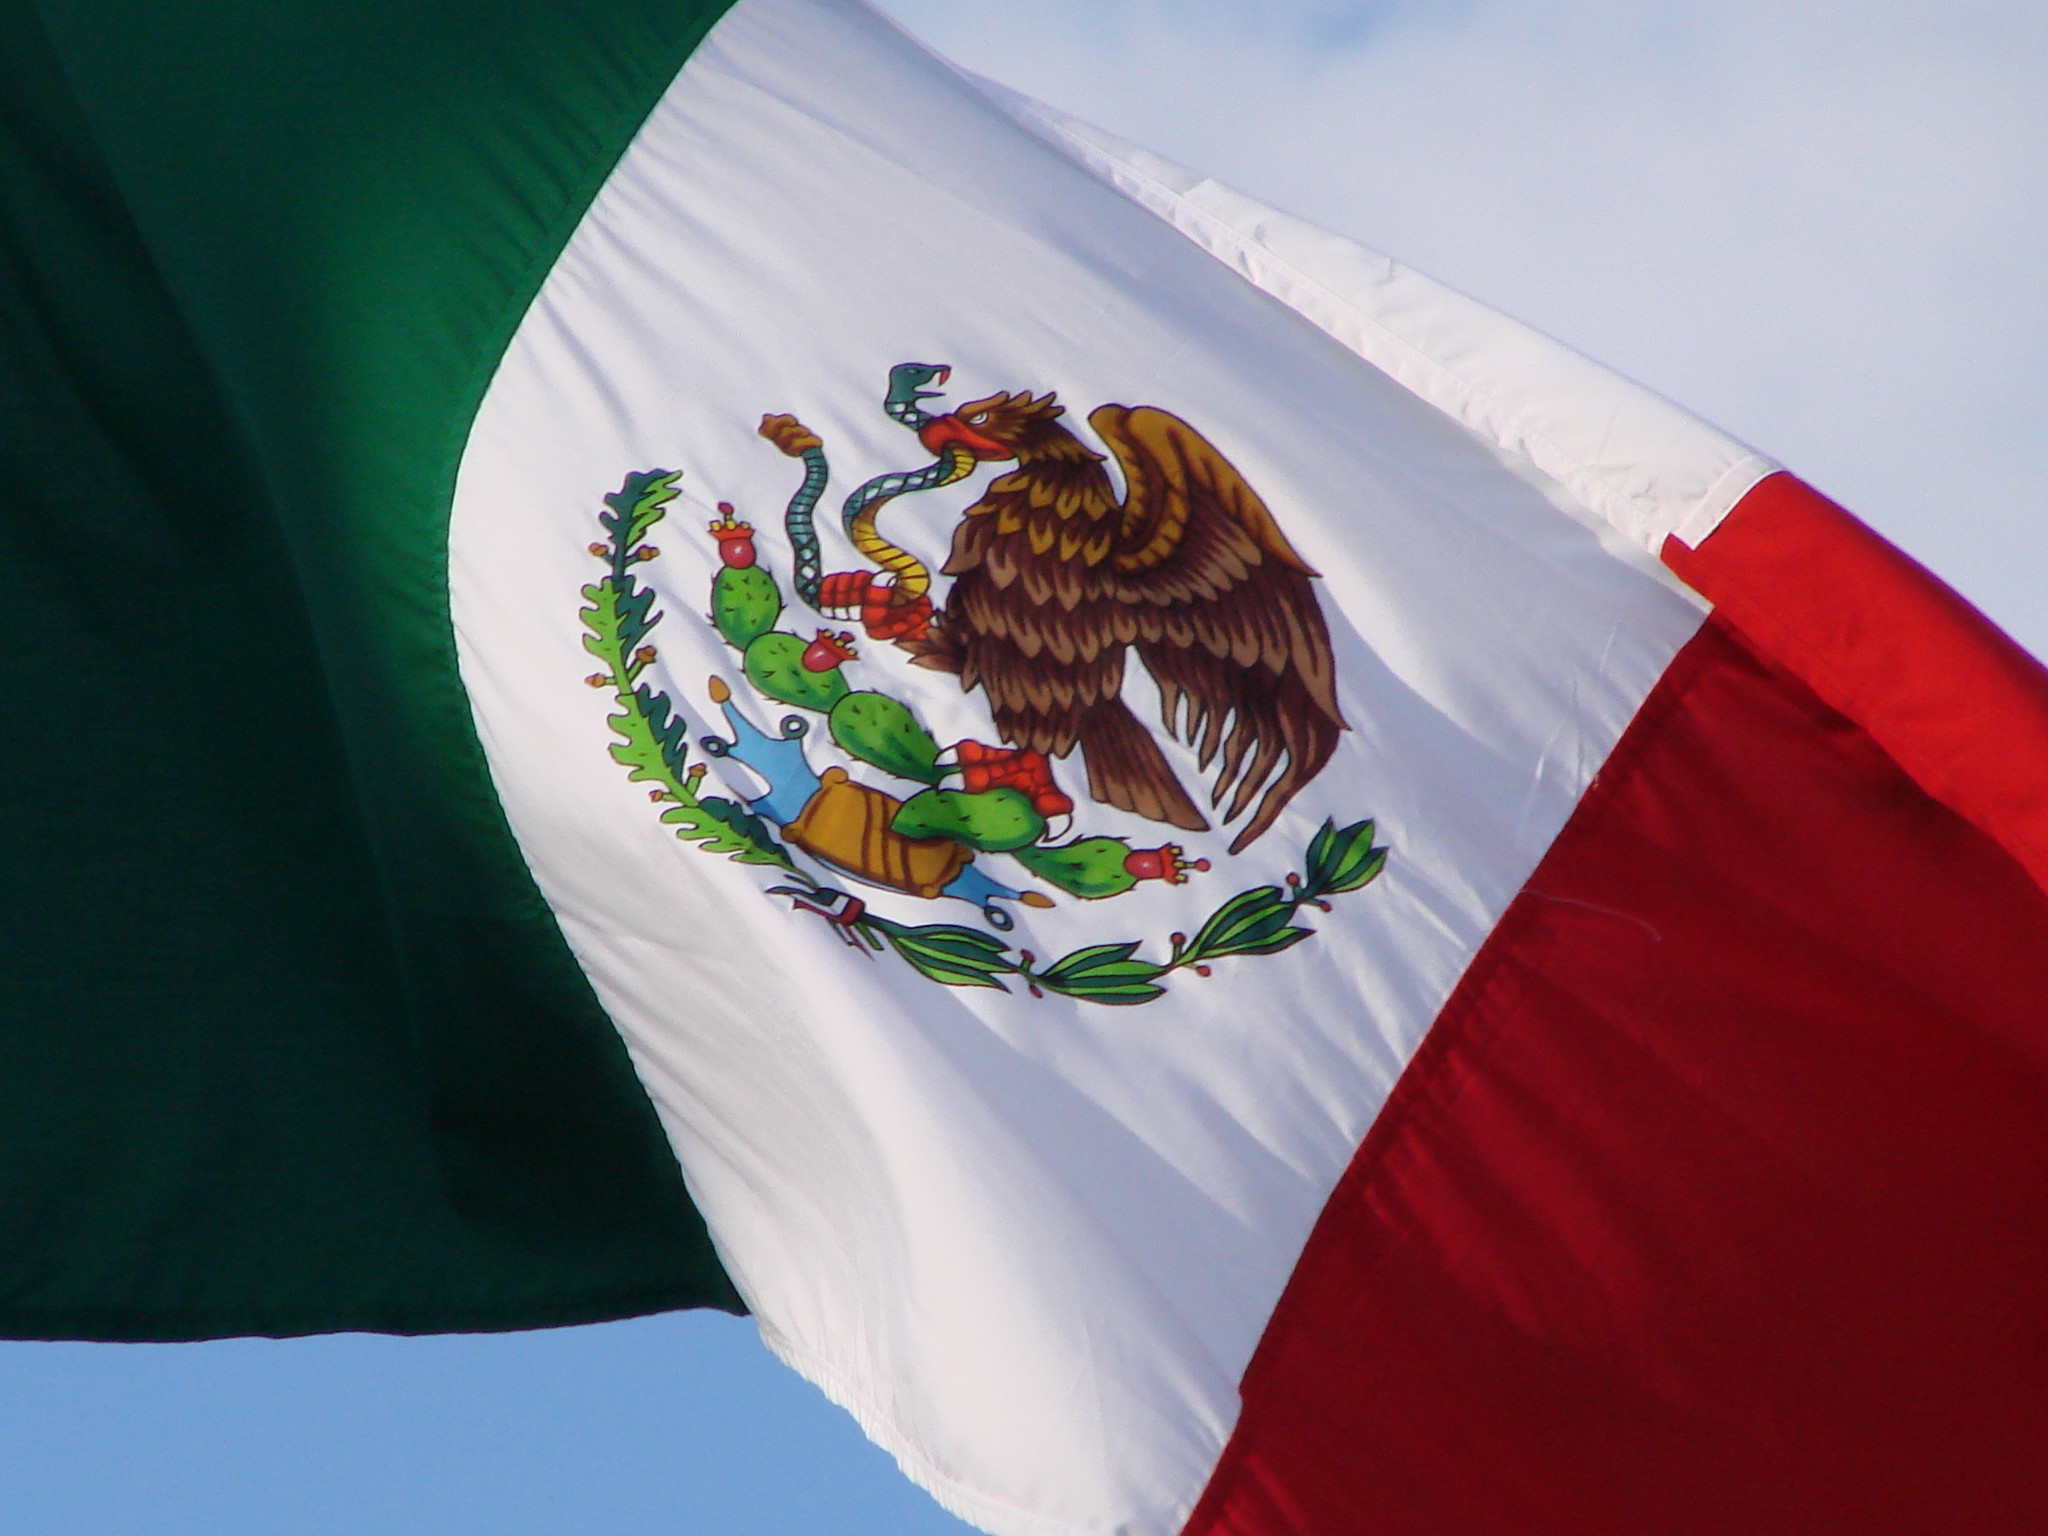 0 Result Images of Bandera De Mexico Imagenes Chidas - PNG Image Collection